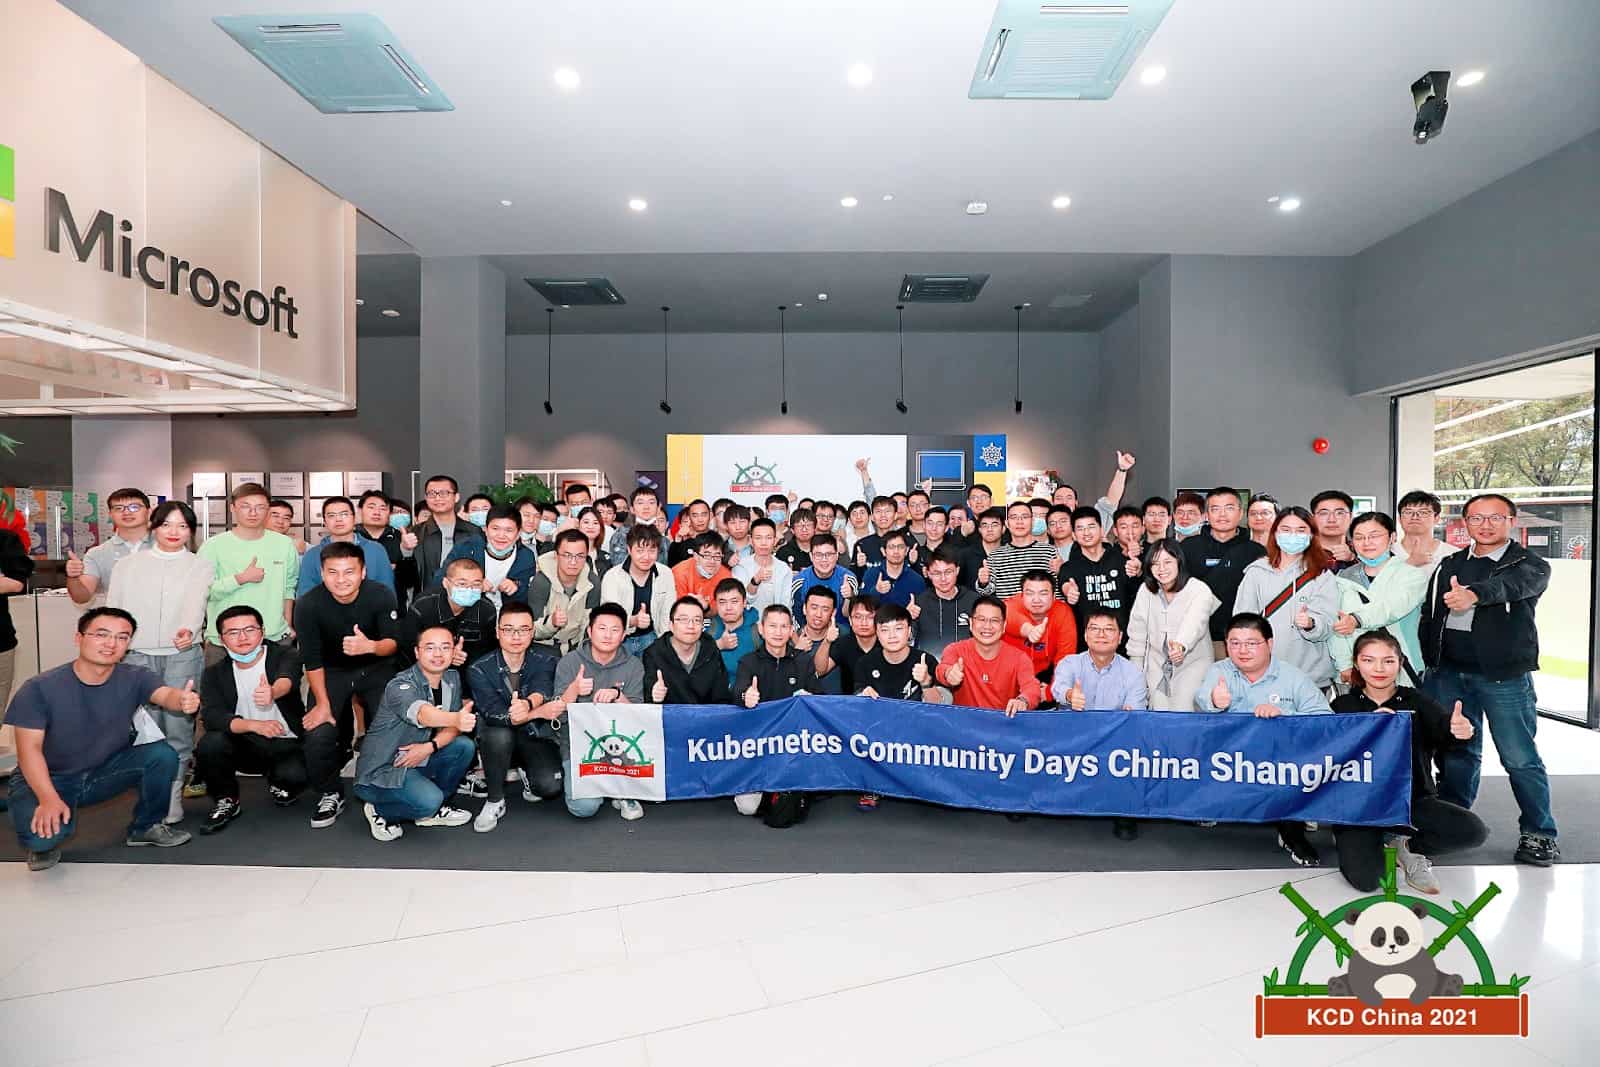 Participants of Kubernetes Community Days posing to camera with KCD China Shanghai banner in the Microsoft Shanghai office